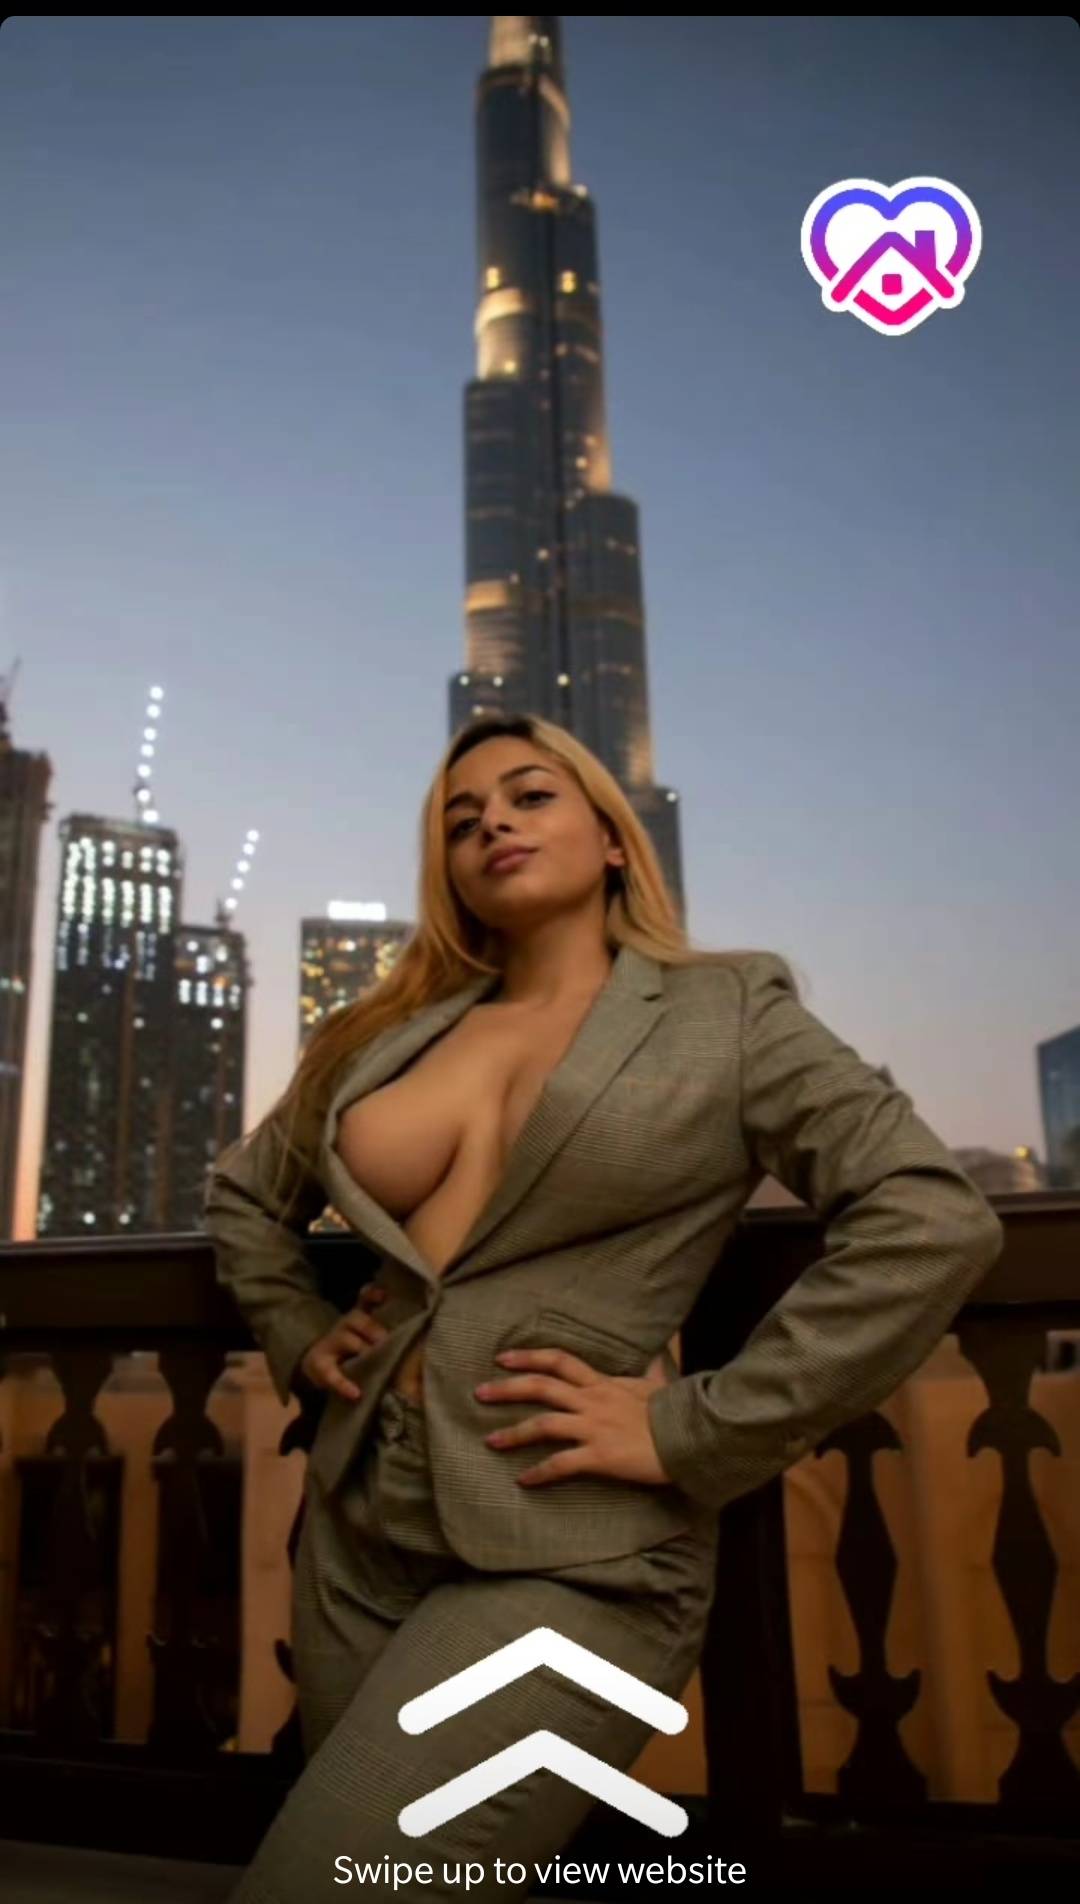 Titties (almost) out in the middle East